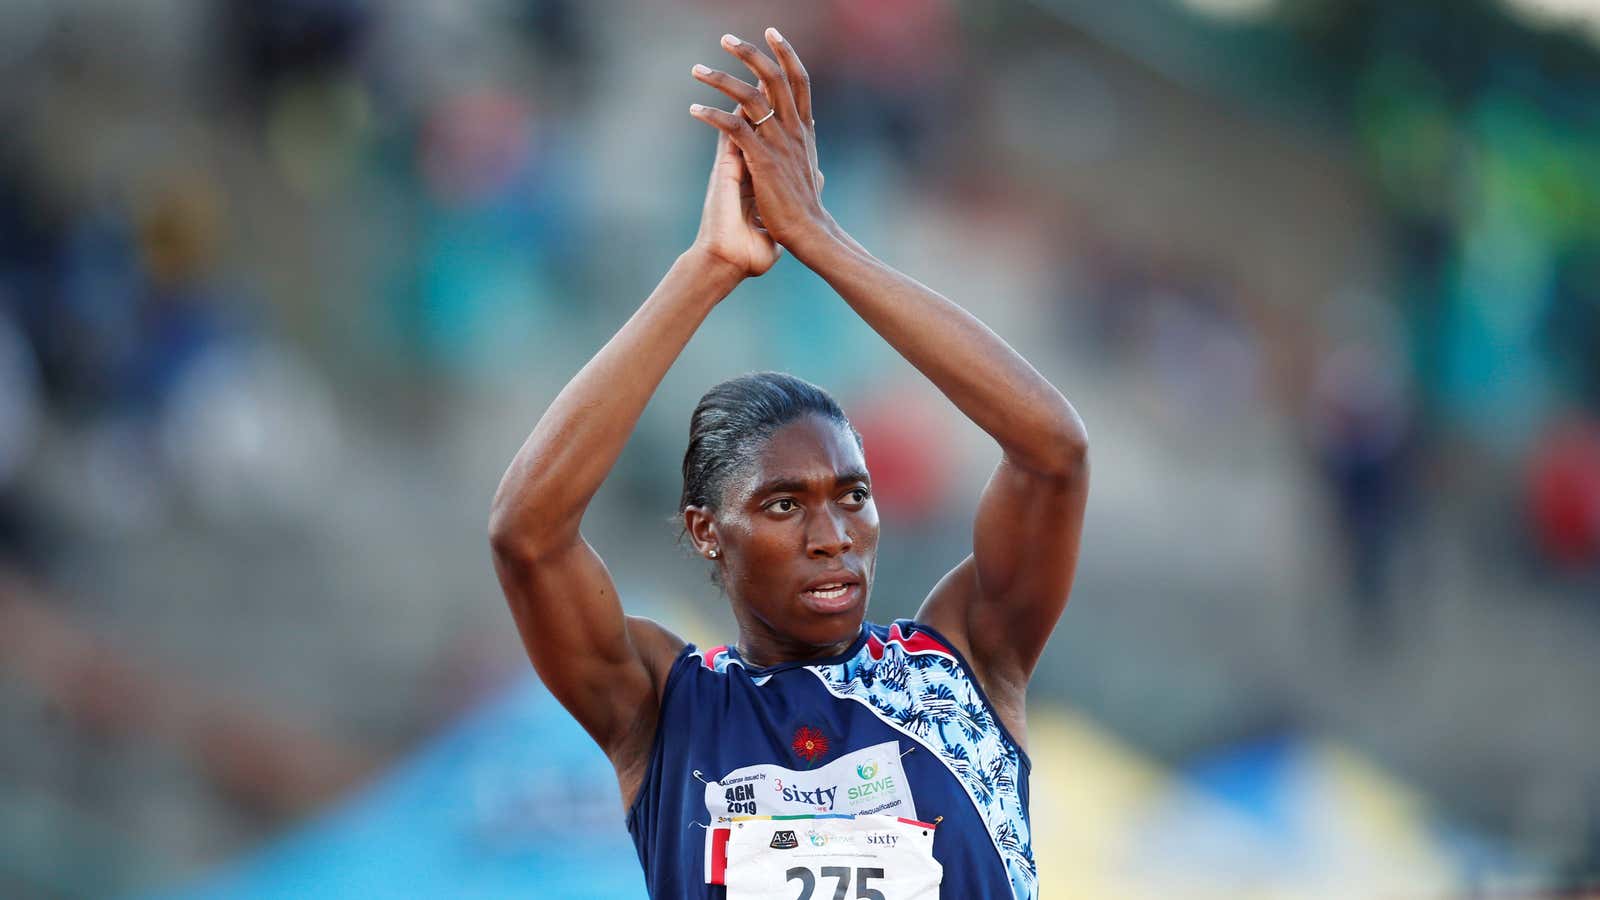 Caster Semenya, winner of two Olympic medals, refused to take hormone-reducing drugs and will not compete at the Tokyo Olympics.